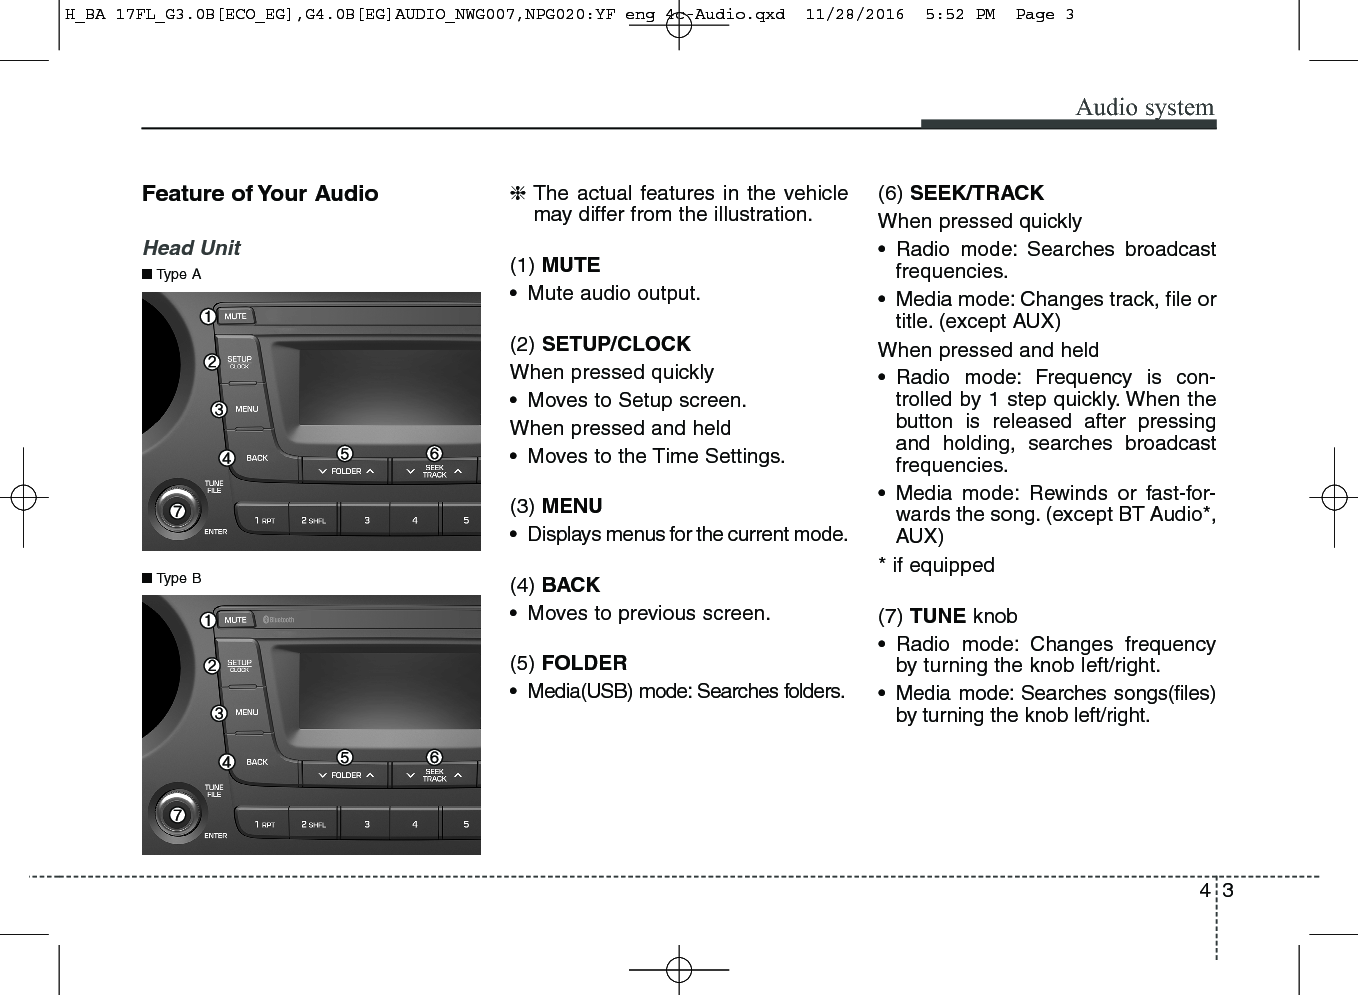 43Audio systemFeature of Your AudioHead Unit❈The actual features in the vehiclemay differ from the illustration.(1) MUTE• Mute audio output.(2) SETUP/CLOCKWhen pressed quickly• Moves to Setup screen.When pressed and held• Moves to the Time Settings.(3) MENU• Displays menus for the current mode.(4) BACK• Moves to previous screen.(5) FOLDER• Media(USB) mode: Searches folders.   (6) SEEK/TRACKWhen pressed quickly• Radio mode: Searches broadcastfrequencies.• Media mode: Changes track, file ortitle. (except AUX)When pressed and held• Radio mode: Frequency is con-trolled by 1 step quickly. When thebutton is released after pressingand holding, searches broadcastfrequencies.• Media mode: Rewinds or fast-for-wards the song. (except BT Audio*,AUX)* if equipped(7) TUNE knob• Radio mode: Changes frequencyby turning the knob left/right.• Media mode: Searches songs(files)by turning the knob left/right. ■Type B■Type AH_BA 17FL_G3.0B[ECO_EG],G4.0B[EG]AUDIO_NWG007,NPG020:YF eng 4c-Audio.qxd  11/28/2016  5:52 PM  Page 3